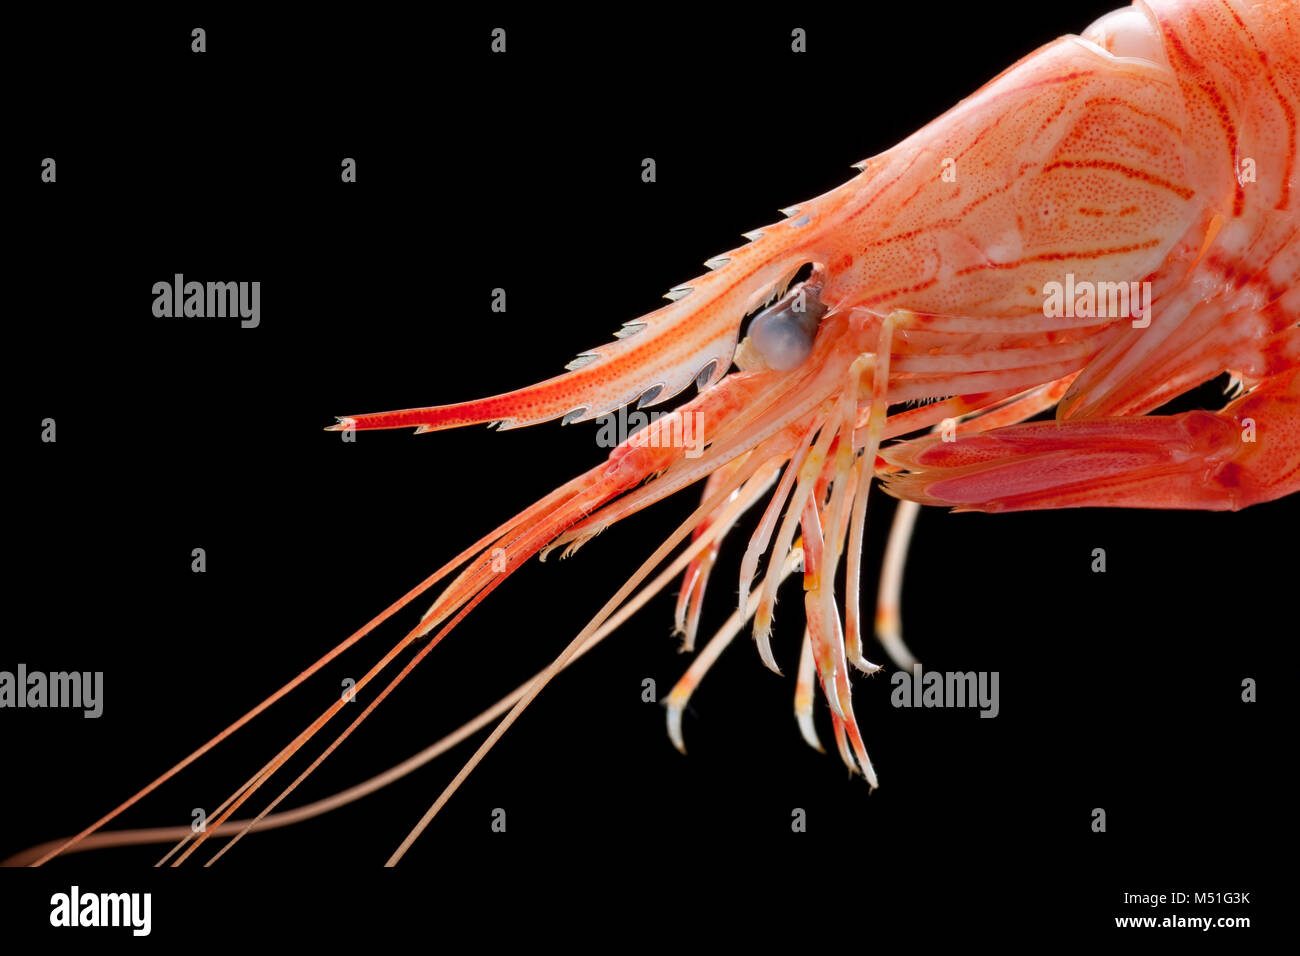 A Cooked boiled common prawn, Palaemon serratus that was caught in a prawn trap lowered off a pier. Dorset England UK GB. Black background. Stock Photo